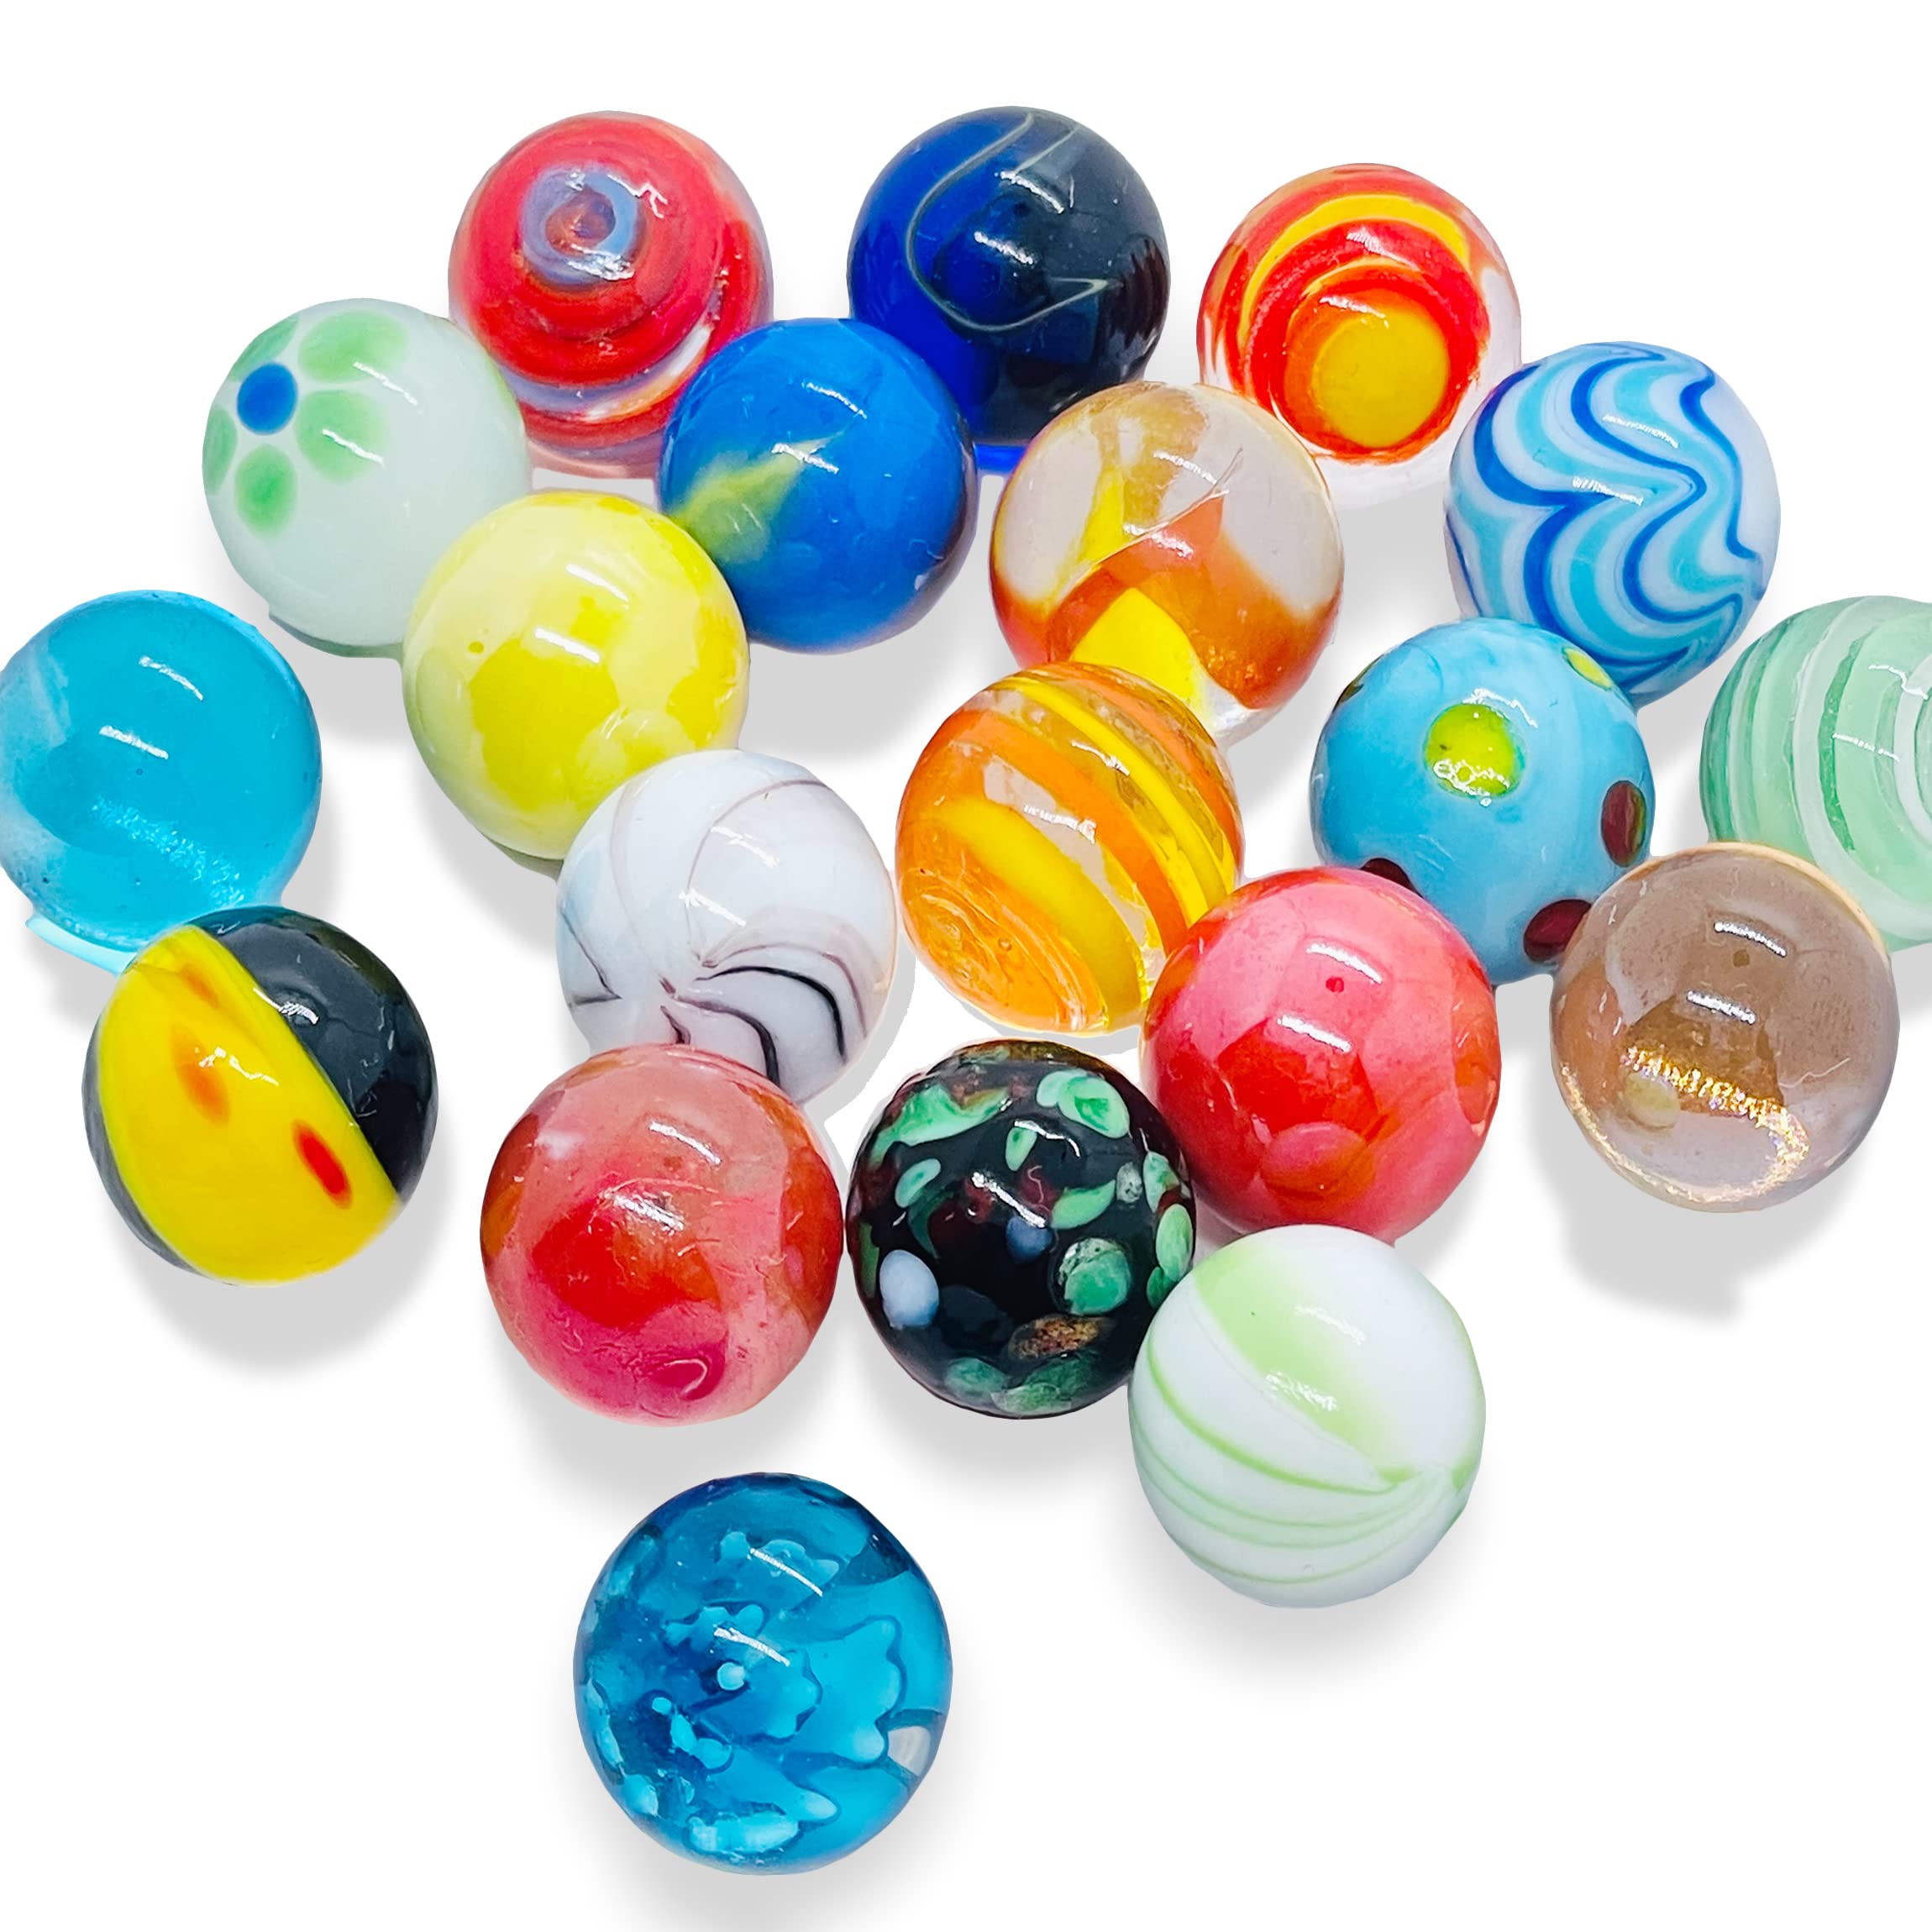 20pcs Beautiful Marbles for Kids Ages 6-8-12 Wonderful and Cheerful Colors Marble Shooters Run Track Game Small Marbles Game Toy (16cm)